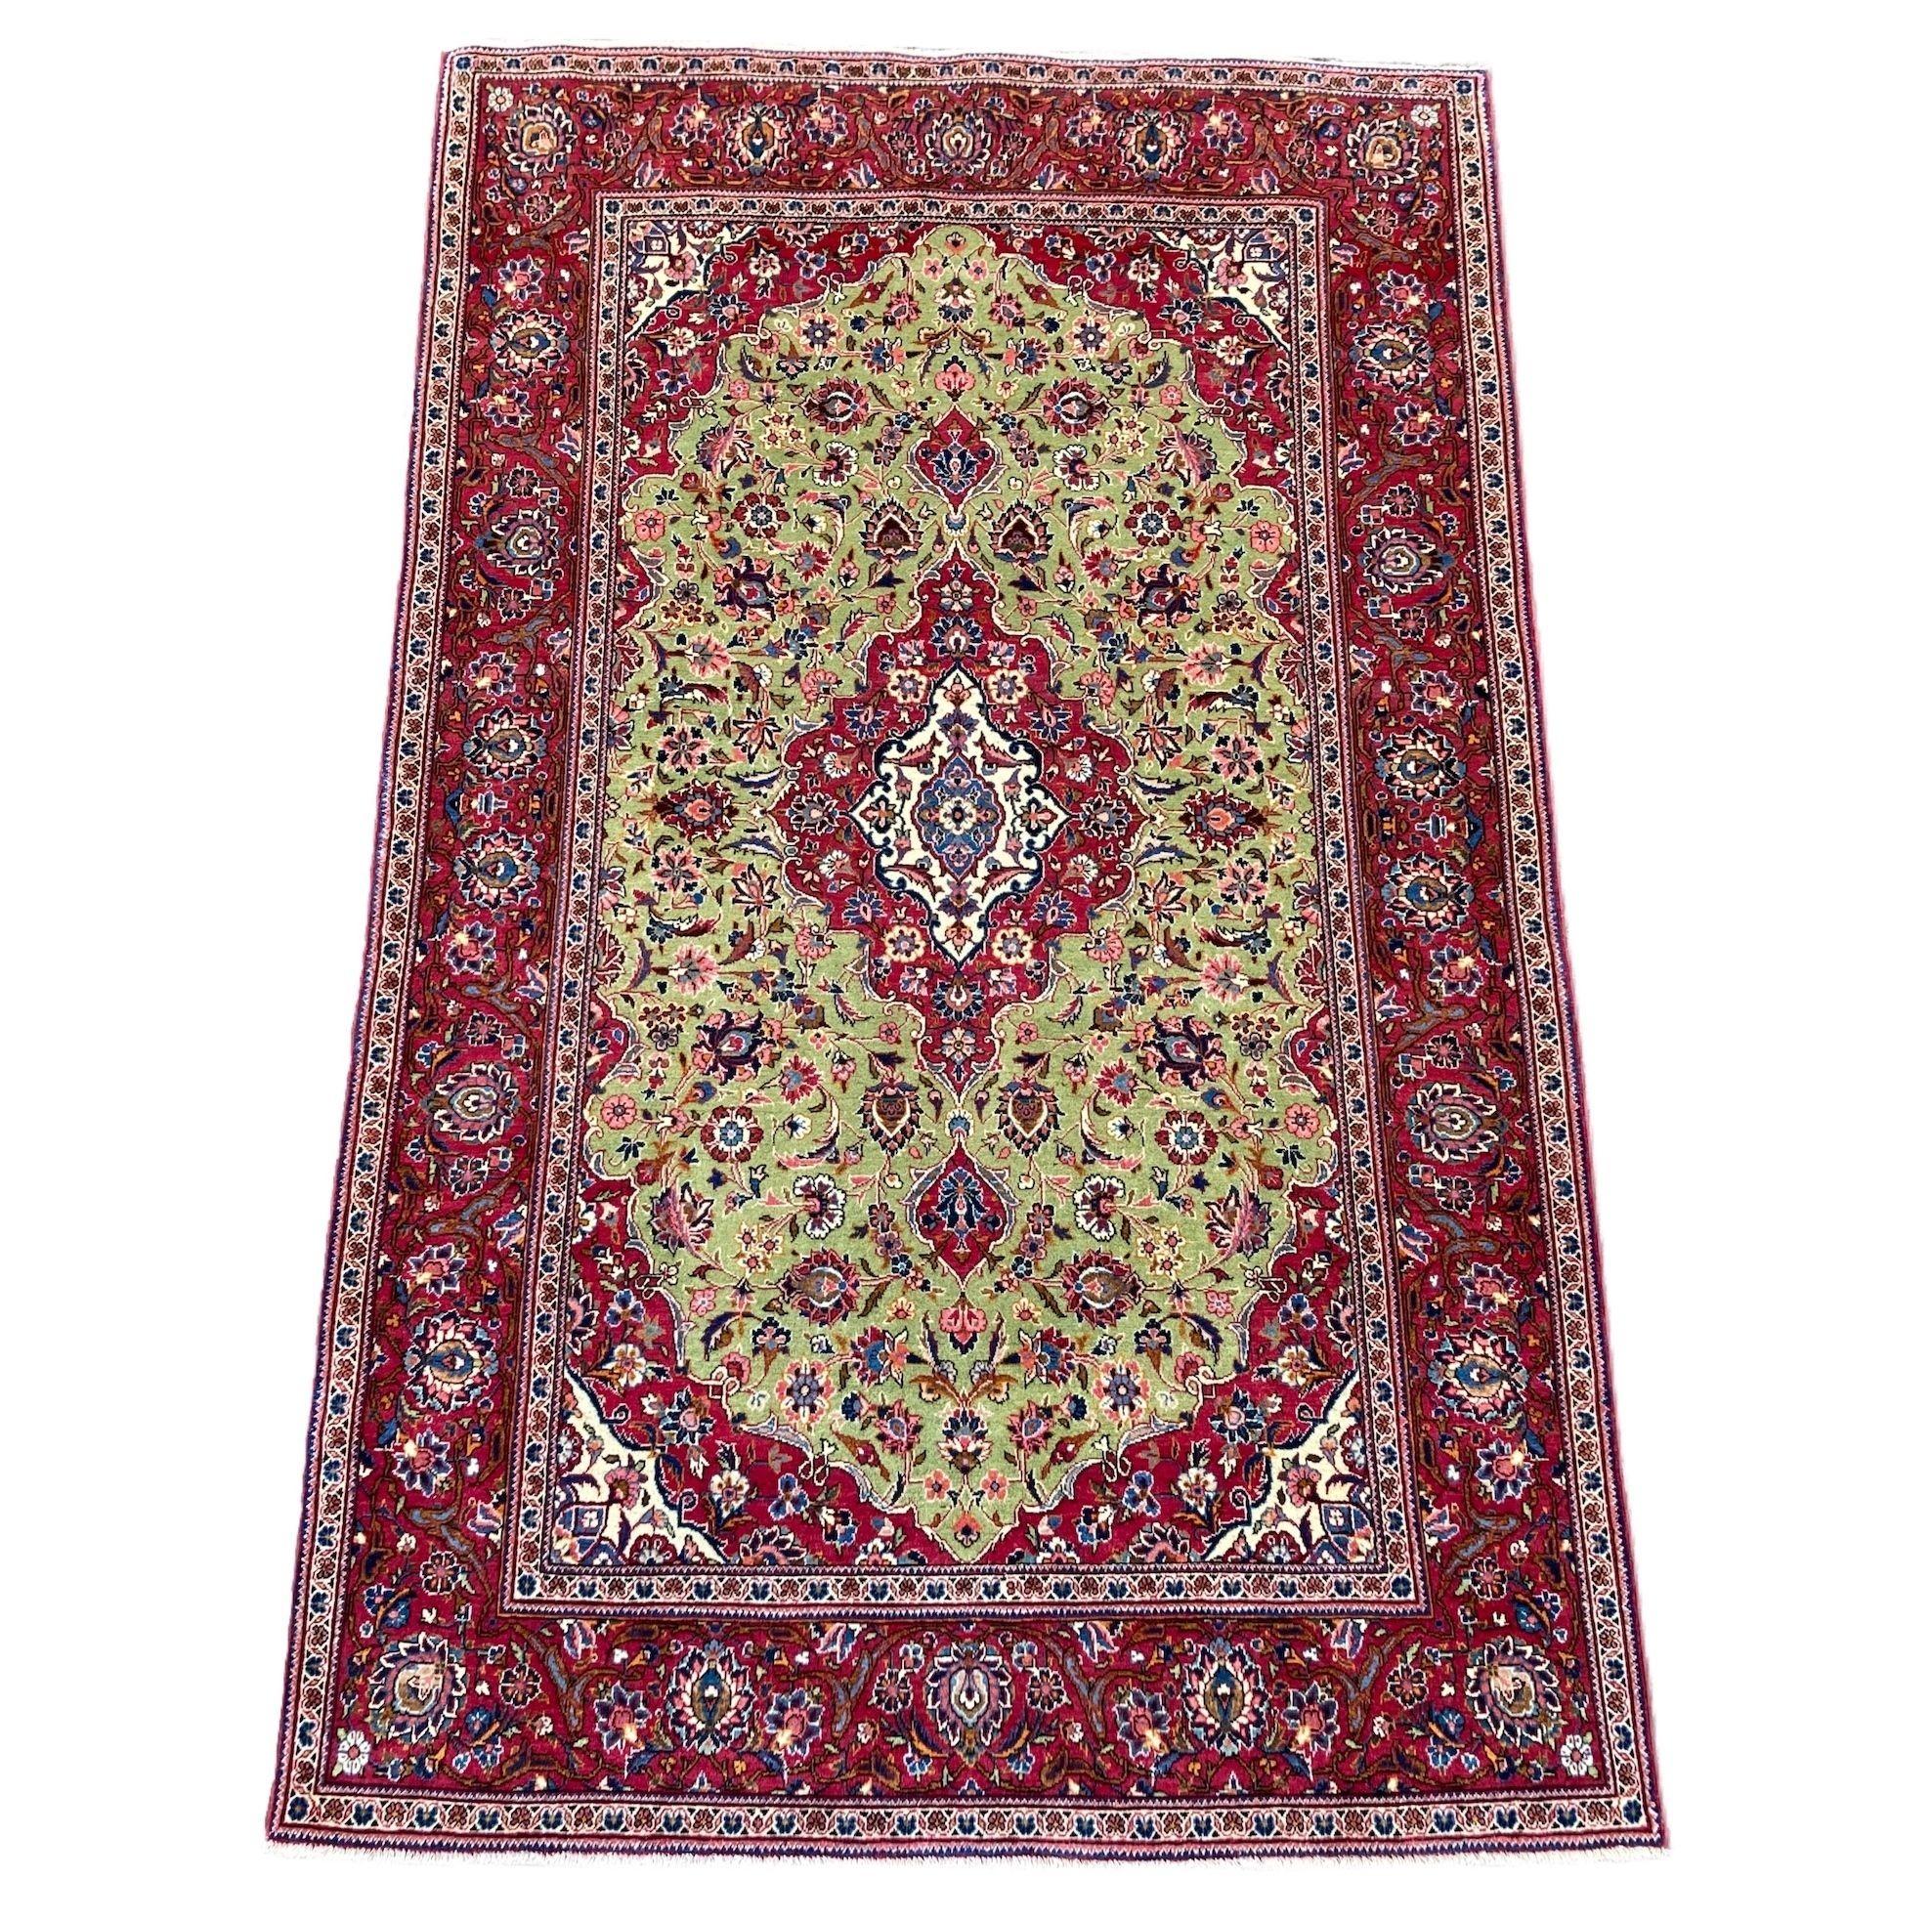 A beautiful antique Kashan rug, hand woven circa 1920 with a classical floral medallion on an unusual green field and red border. Finely woven with lovely wool quality and fabulous secondary colours.
Size: 2.10m x 1.33m (6ft 11in x 4ft 4in)
This rug